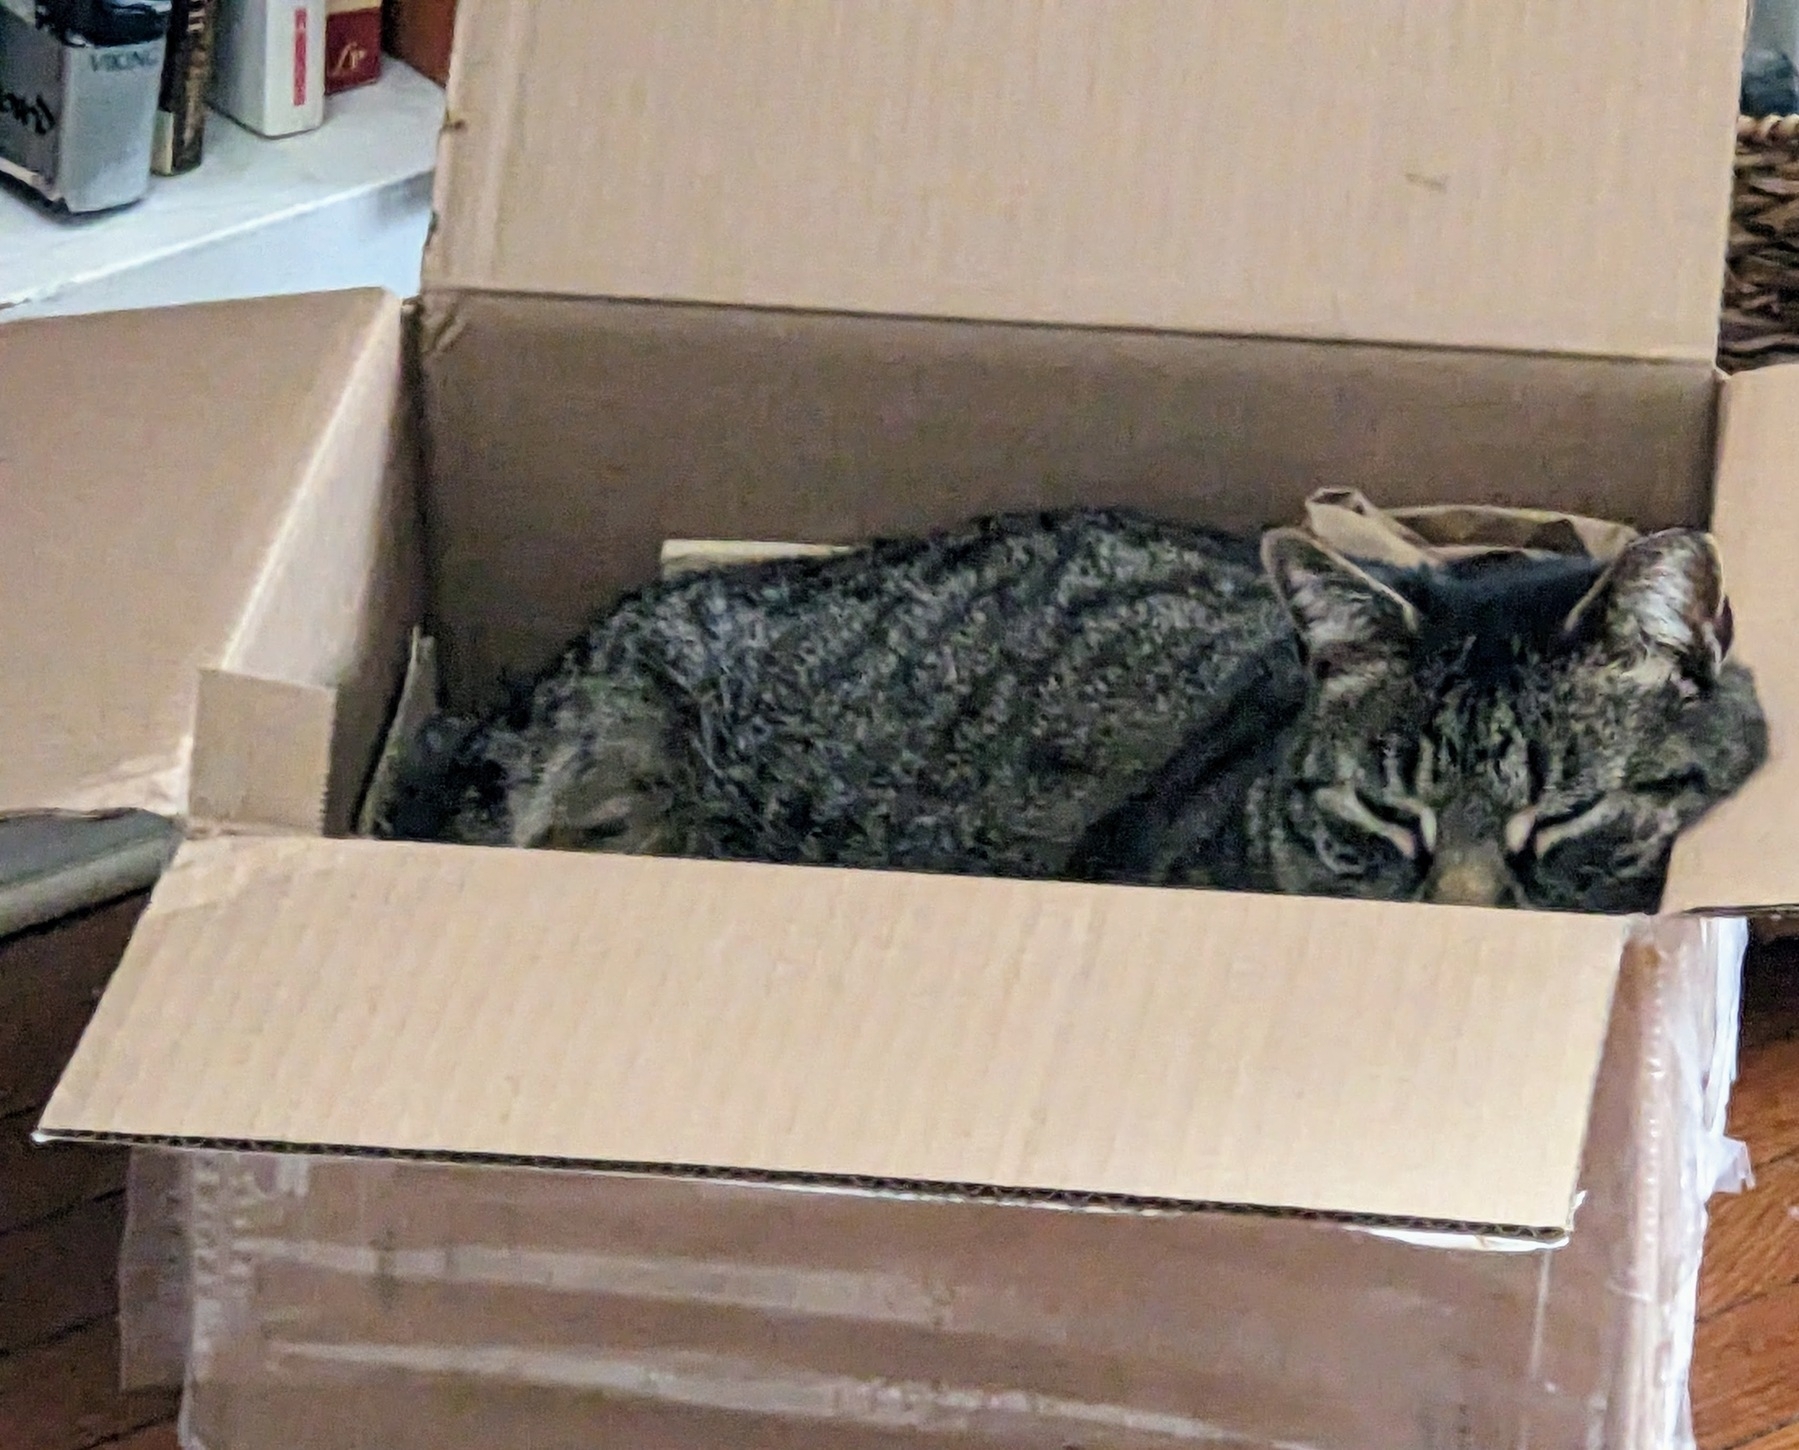 striped cat dozing in a box on a floor next to a bookshelf